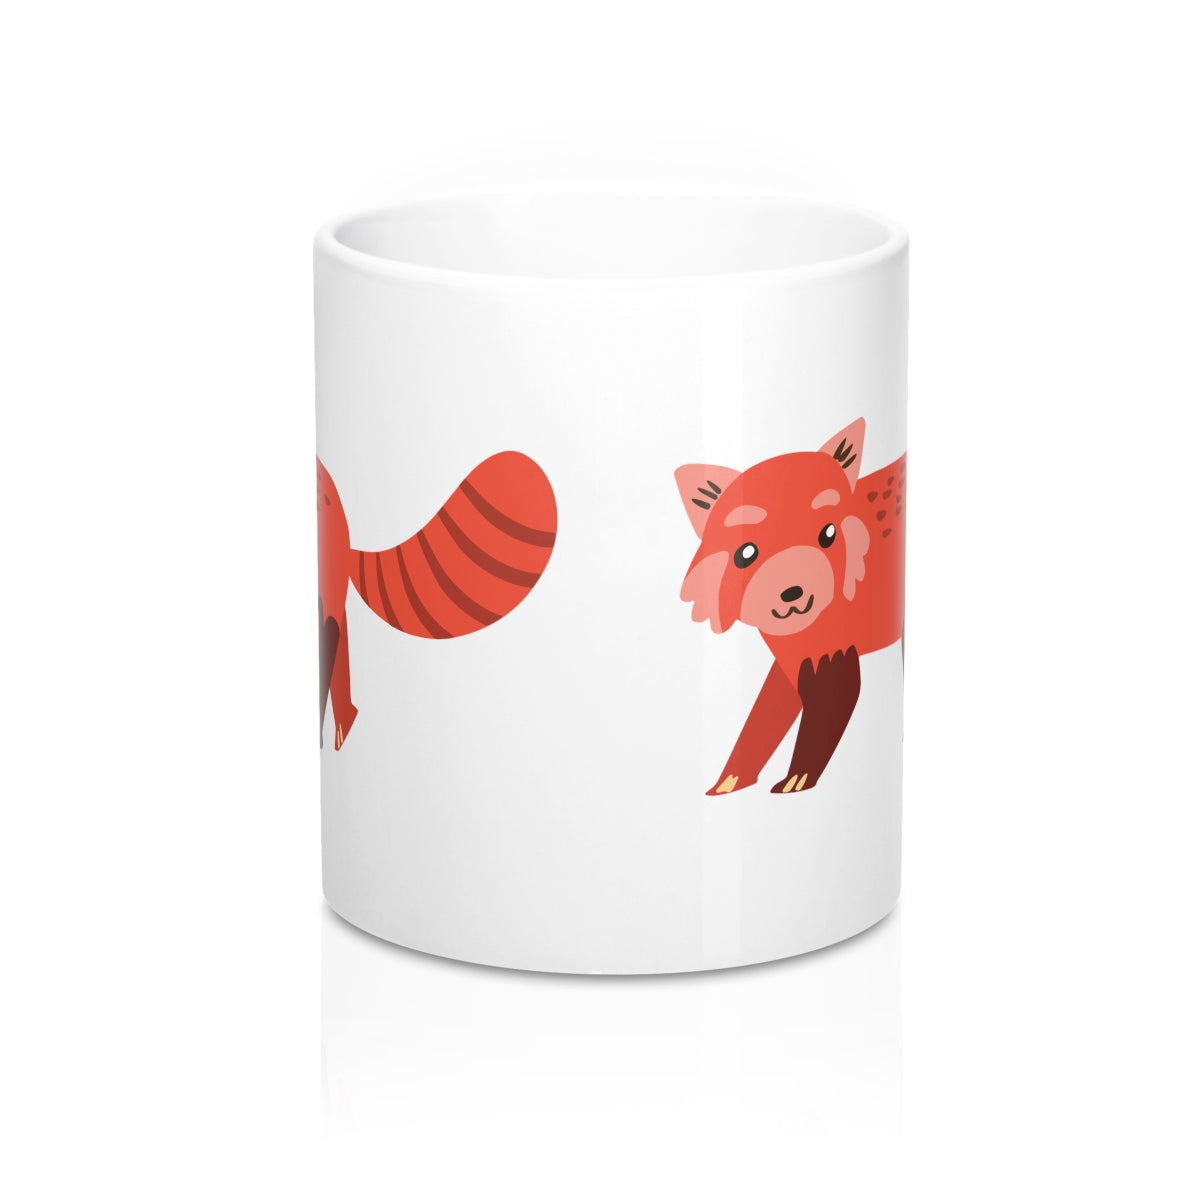 Red Panda Mug, Animal Bear Illustration Ceramic Gifts Cute Coffee Cup Tea Lover Unique Novelty Cool Gift Starcove Fashion